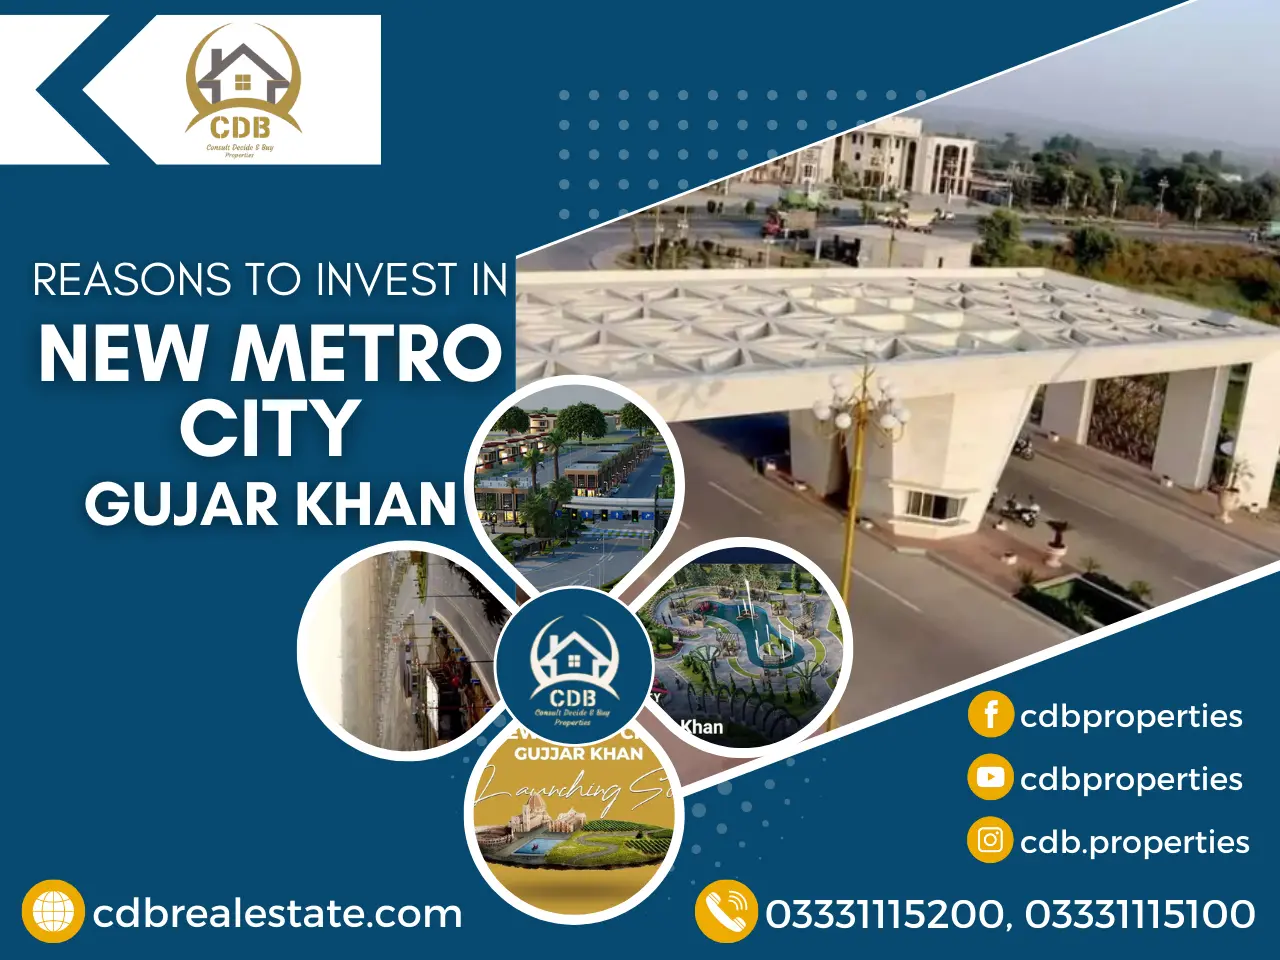 Reasons To Invest in New Metro City Gujar Khan